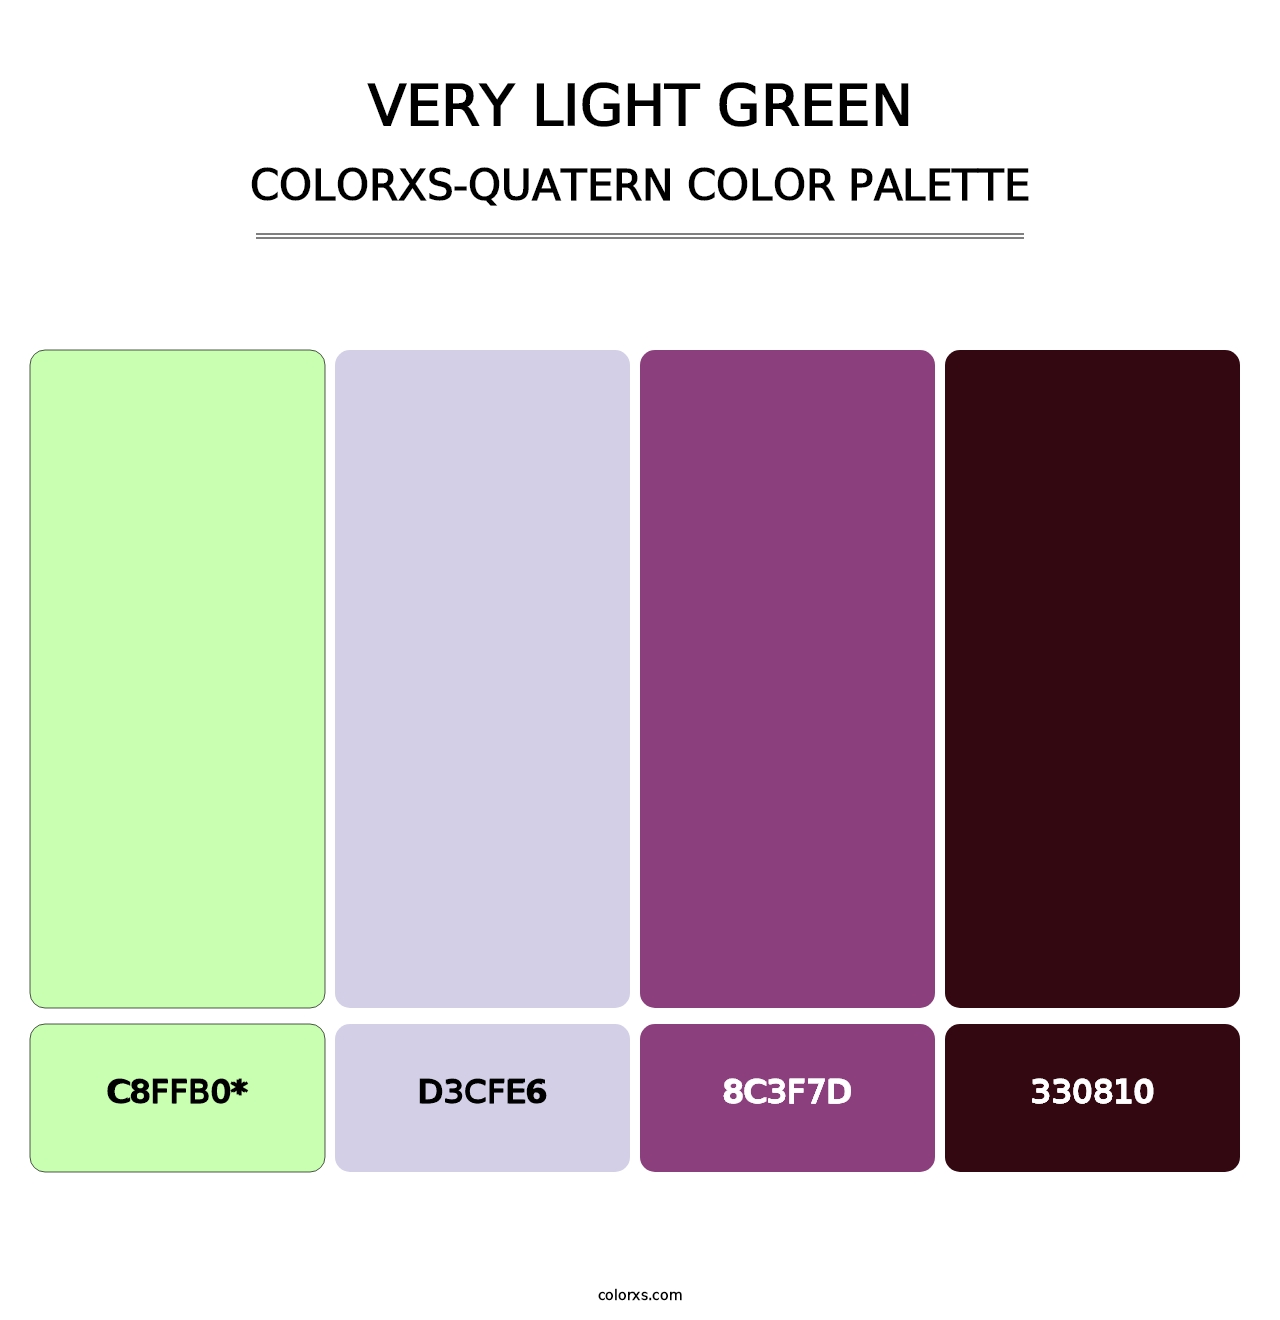 Very Light Green - Colorxs Quatern Palette